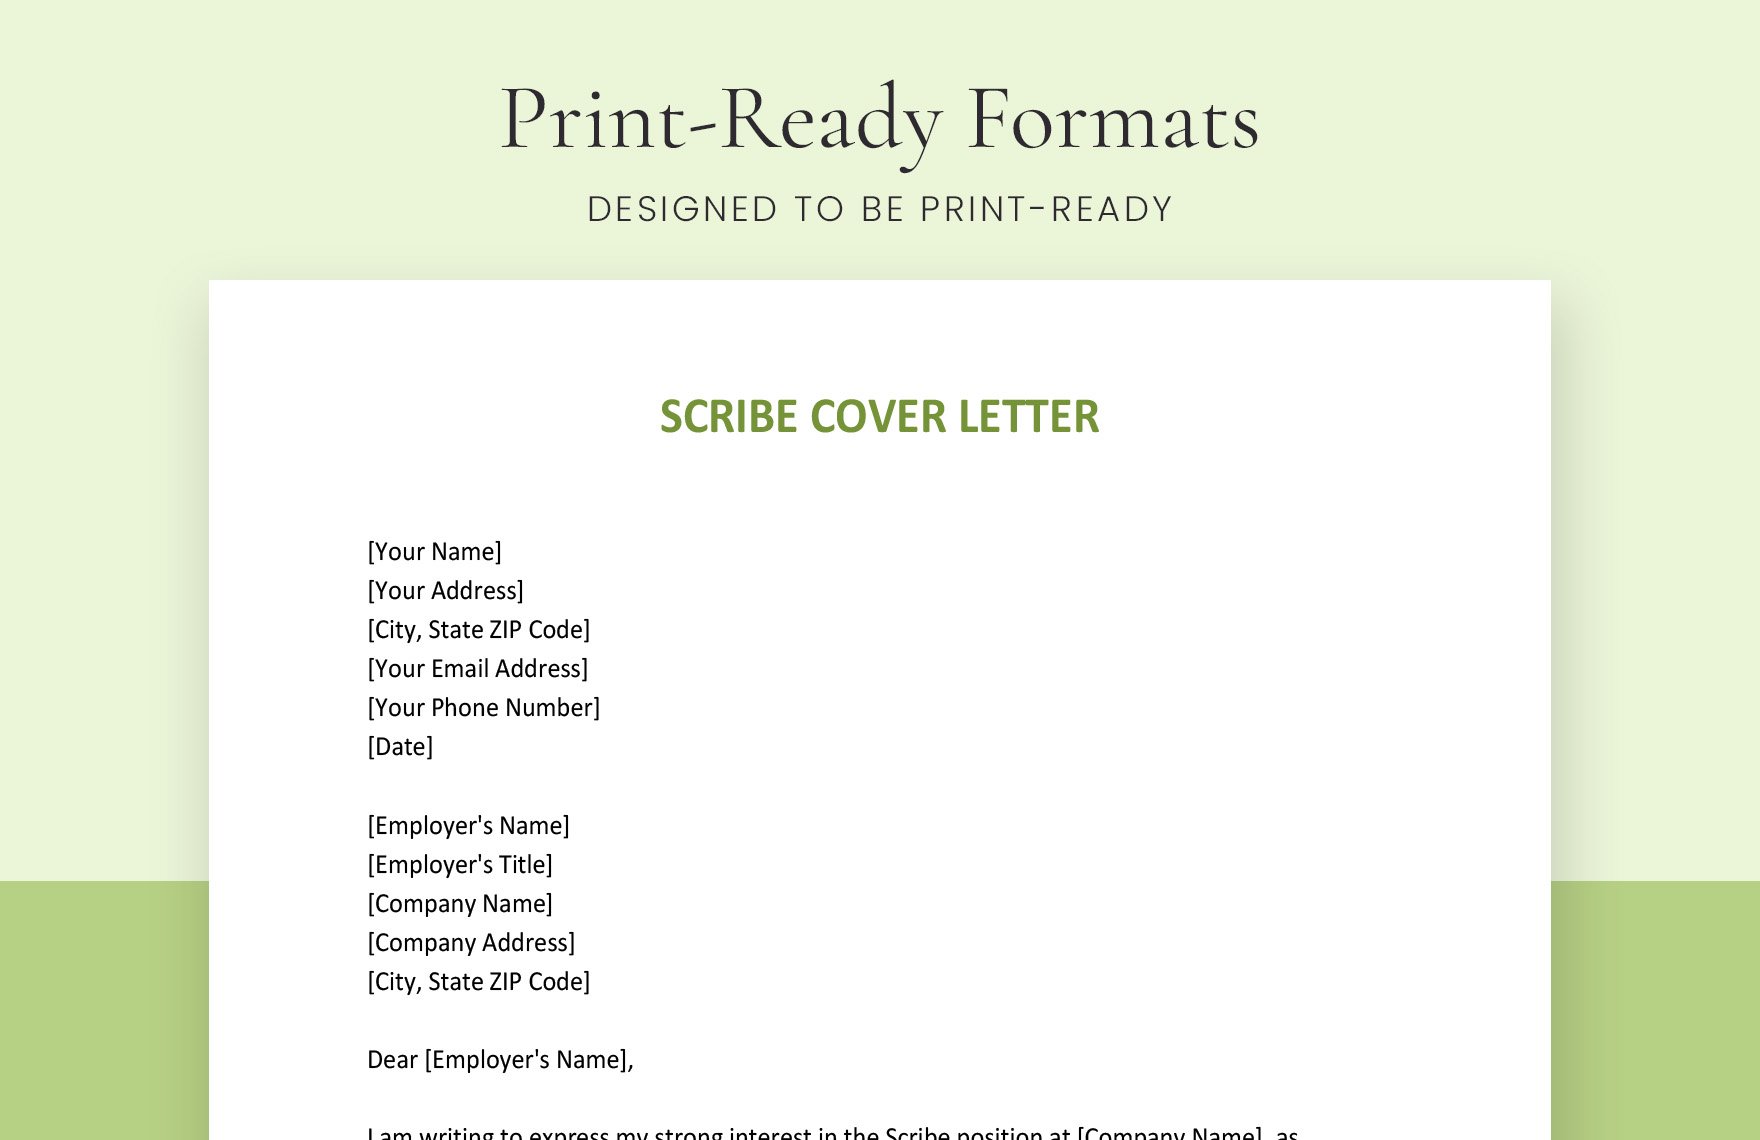 Scribe Cover Letter